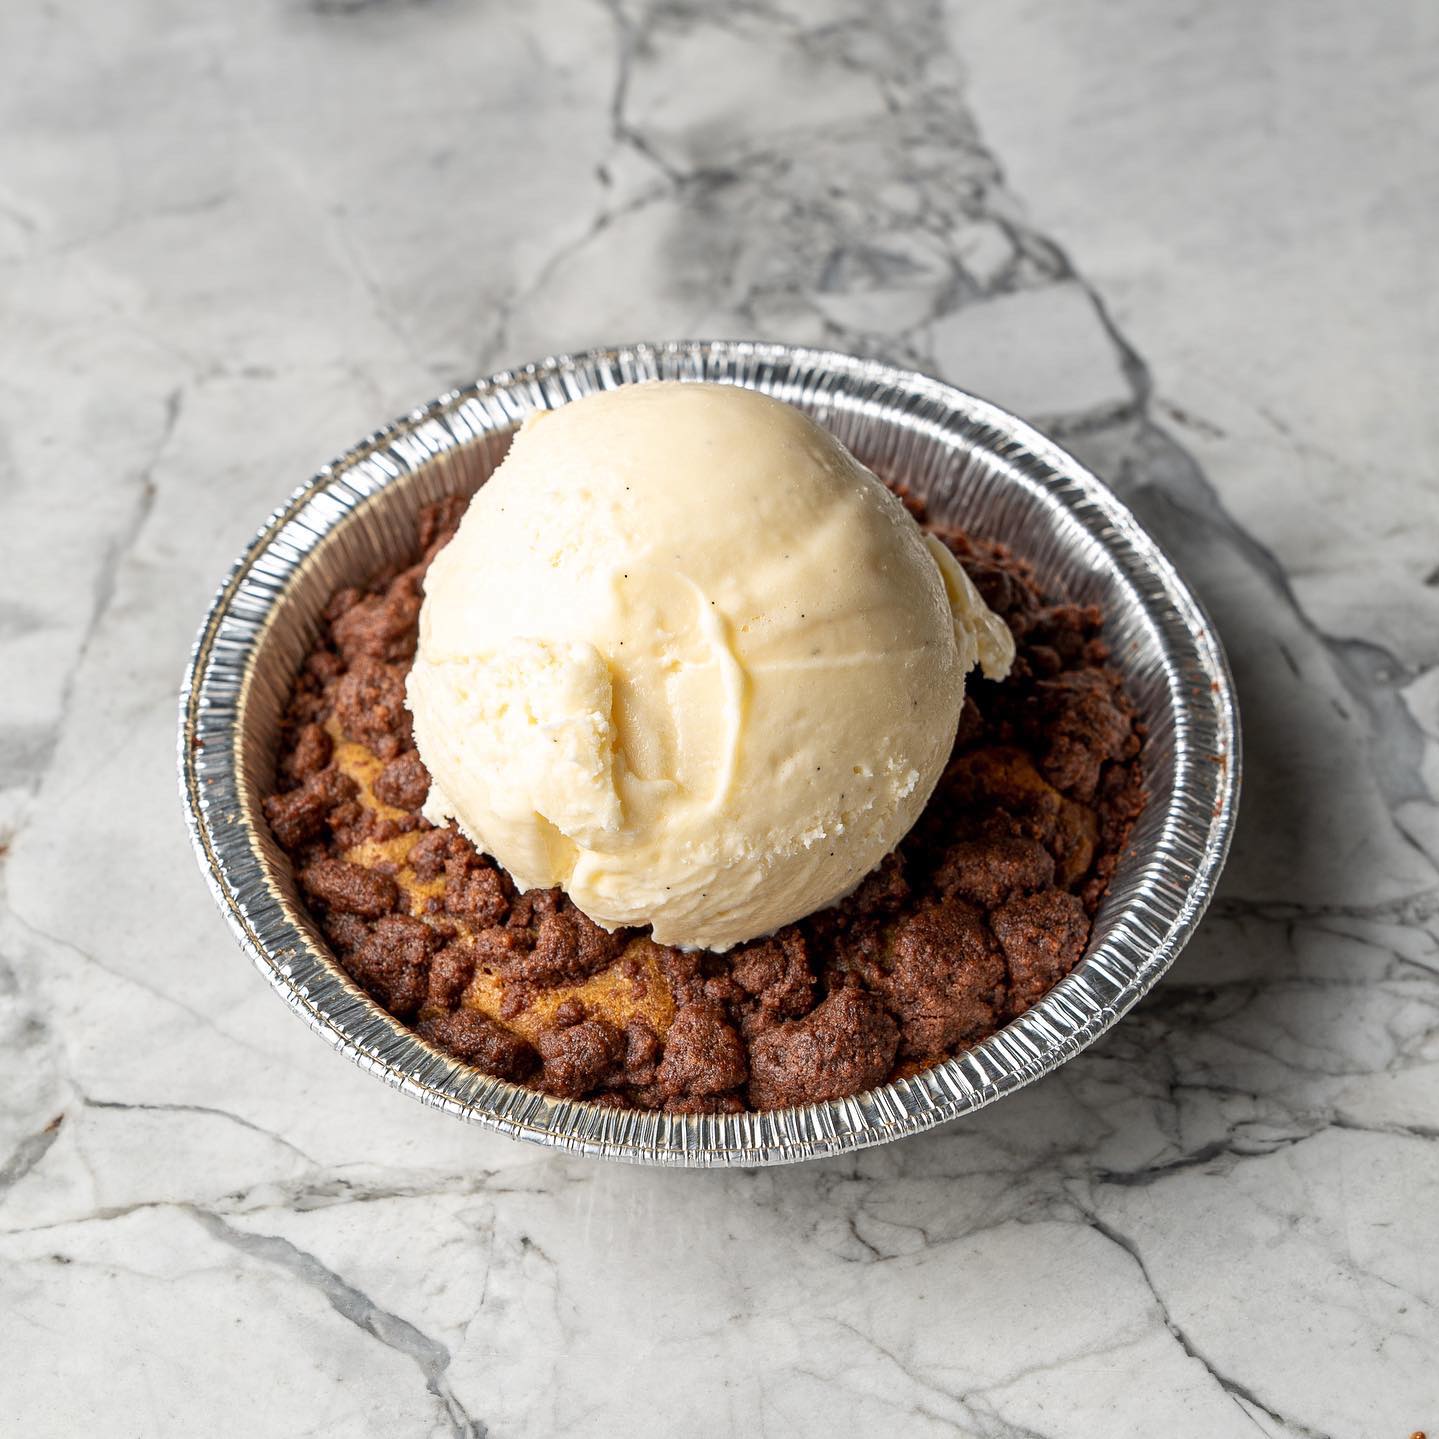 a single serve cookie pie with a scoop of gelato on top